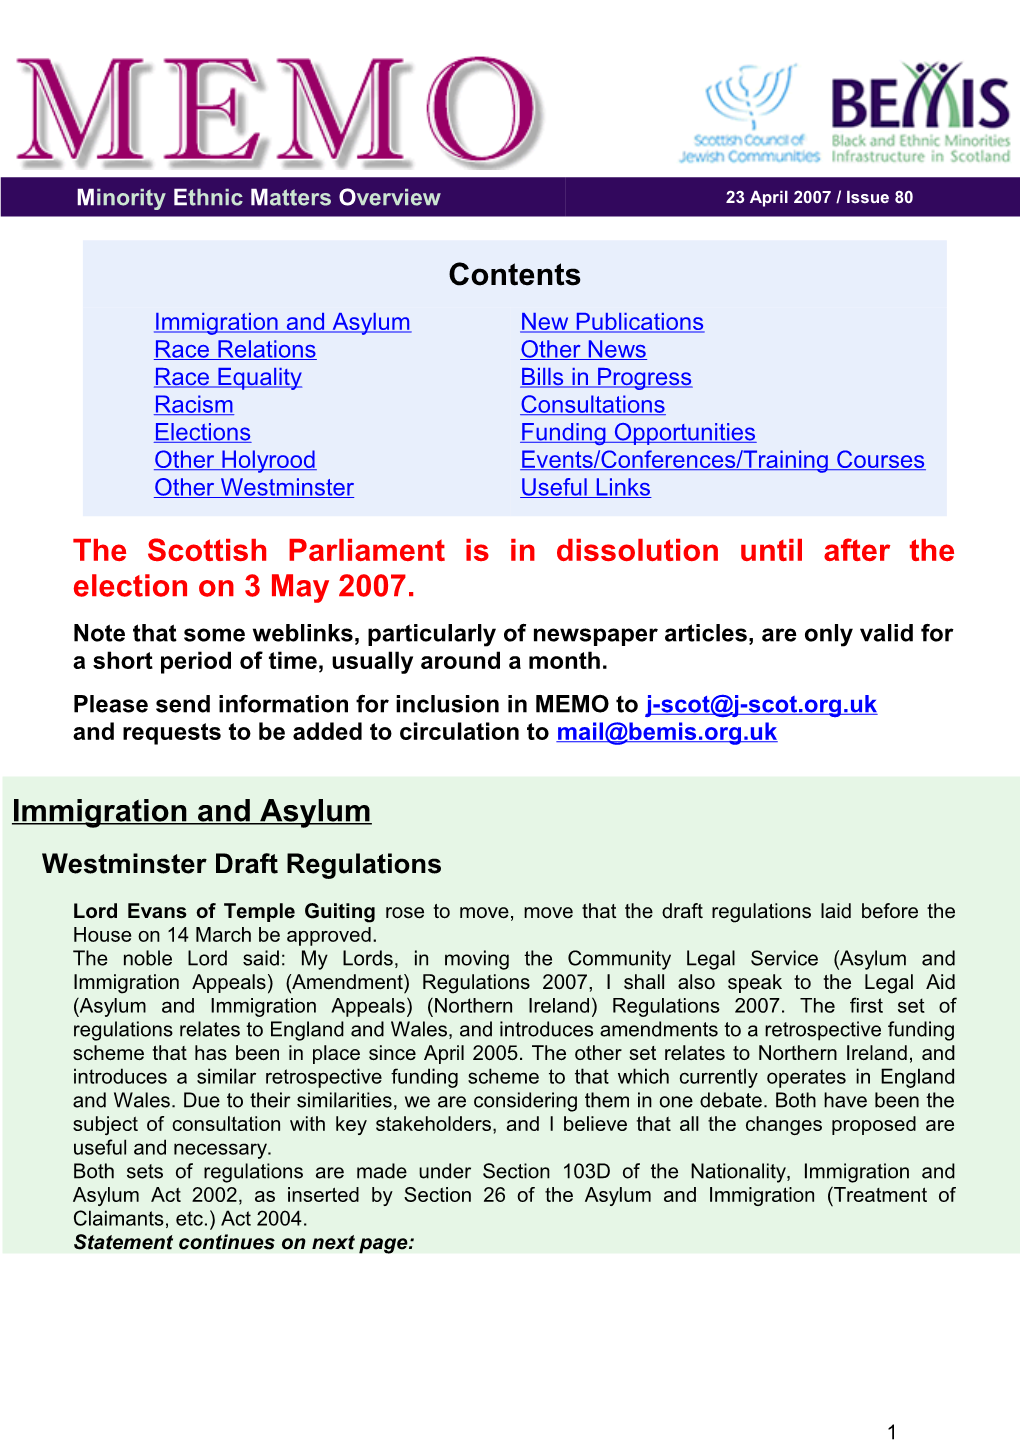 The Scottish Parliament Is in Dissolution Until After the Election on 3 May 2007